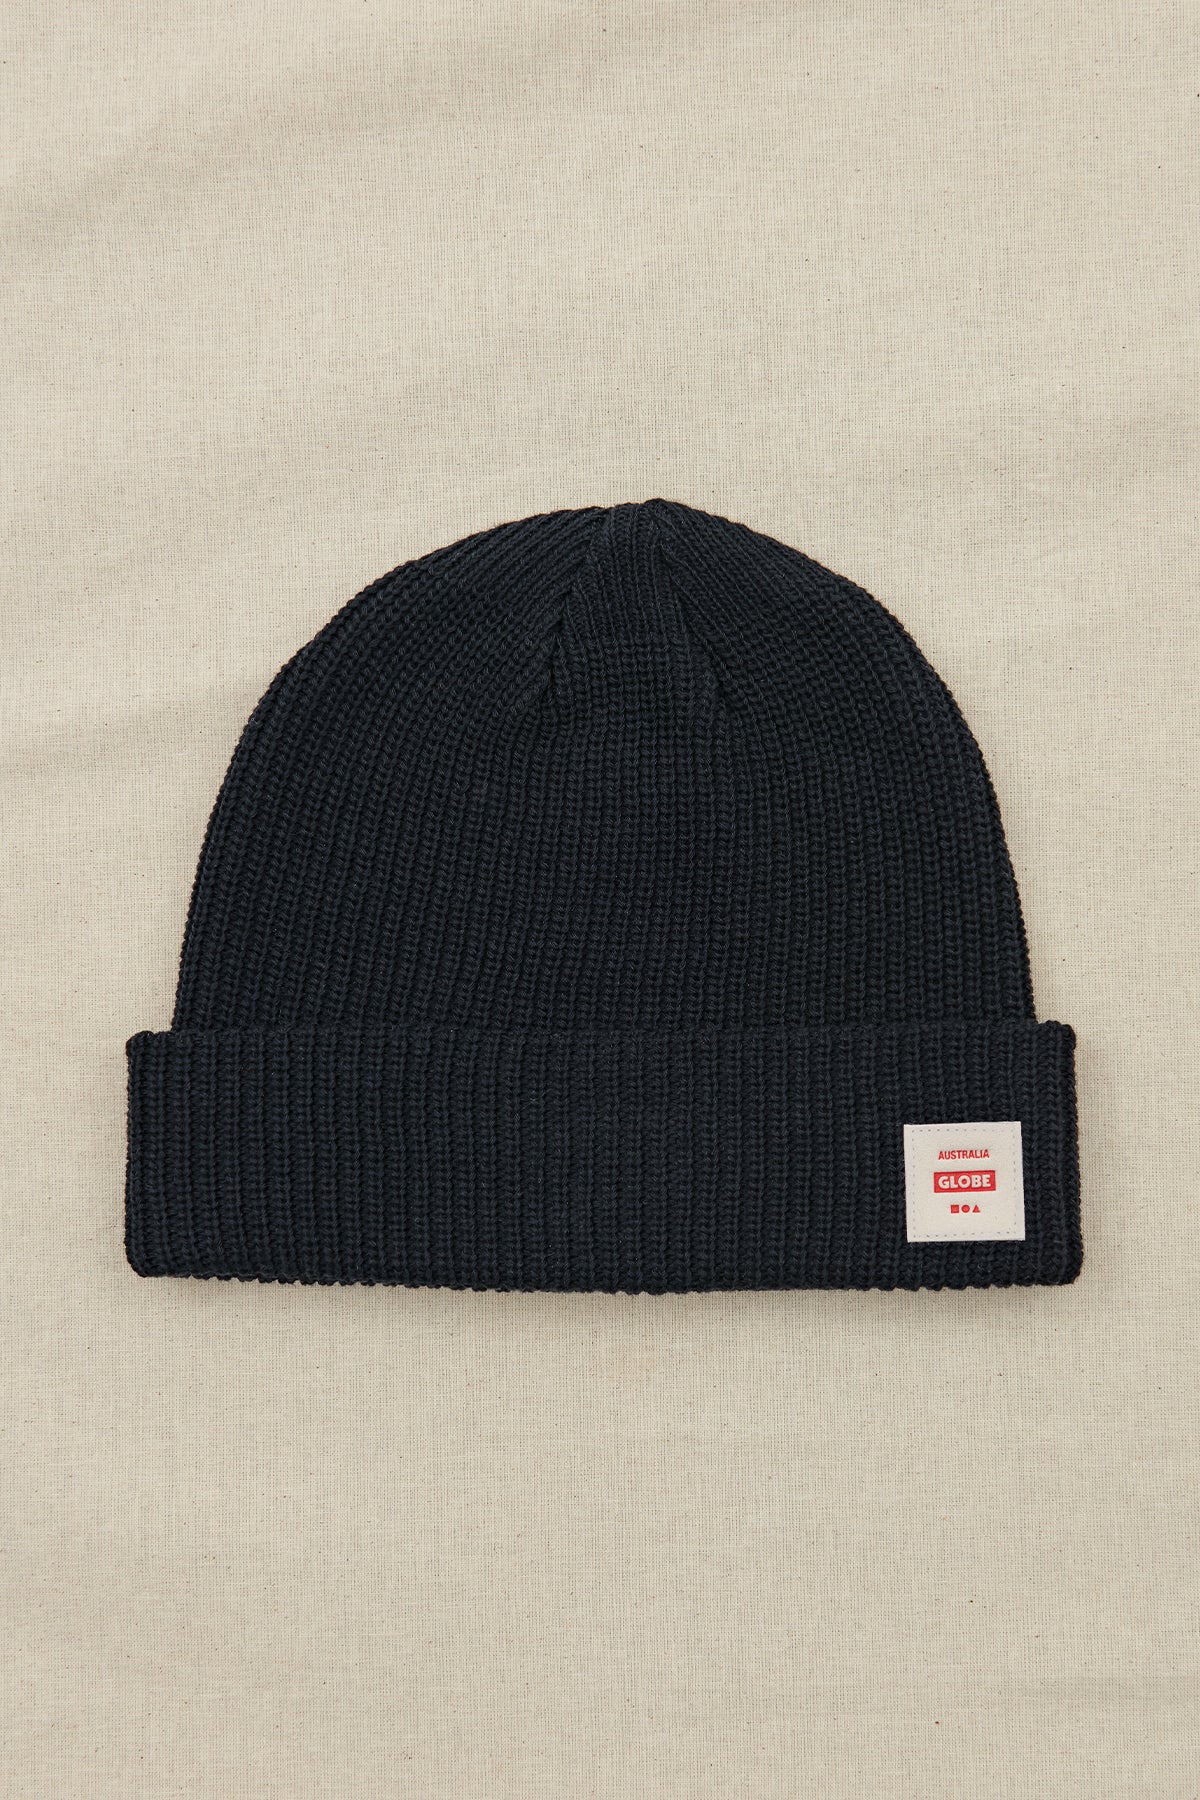 front view of Black Globe beanie